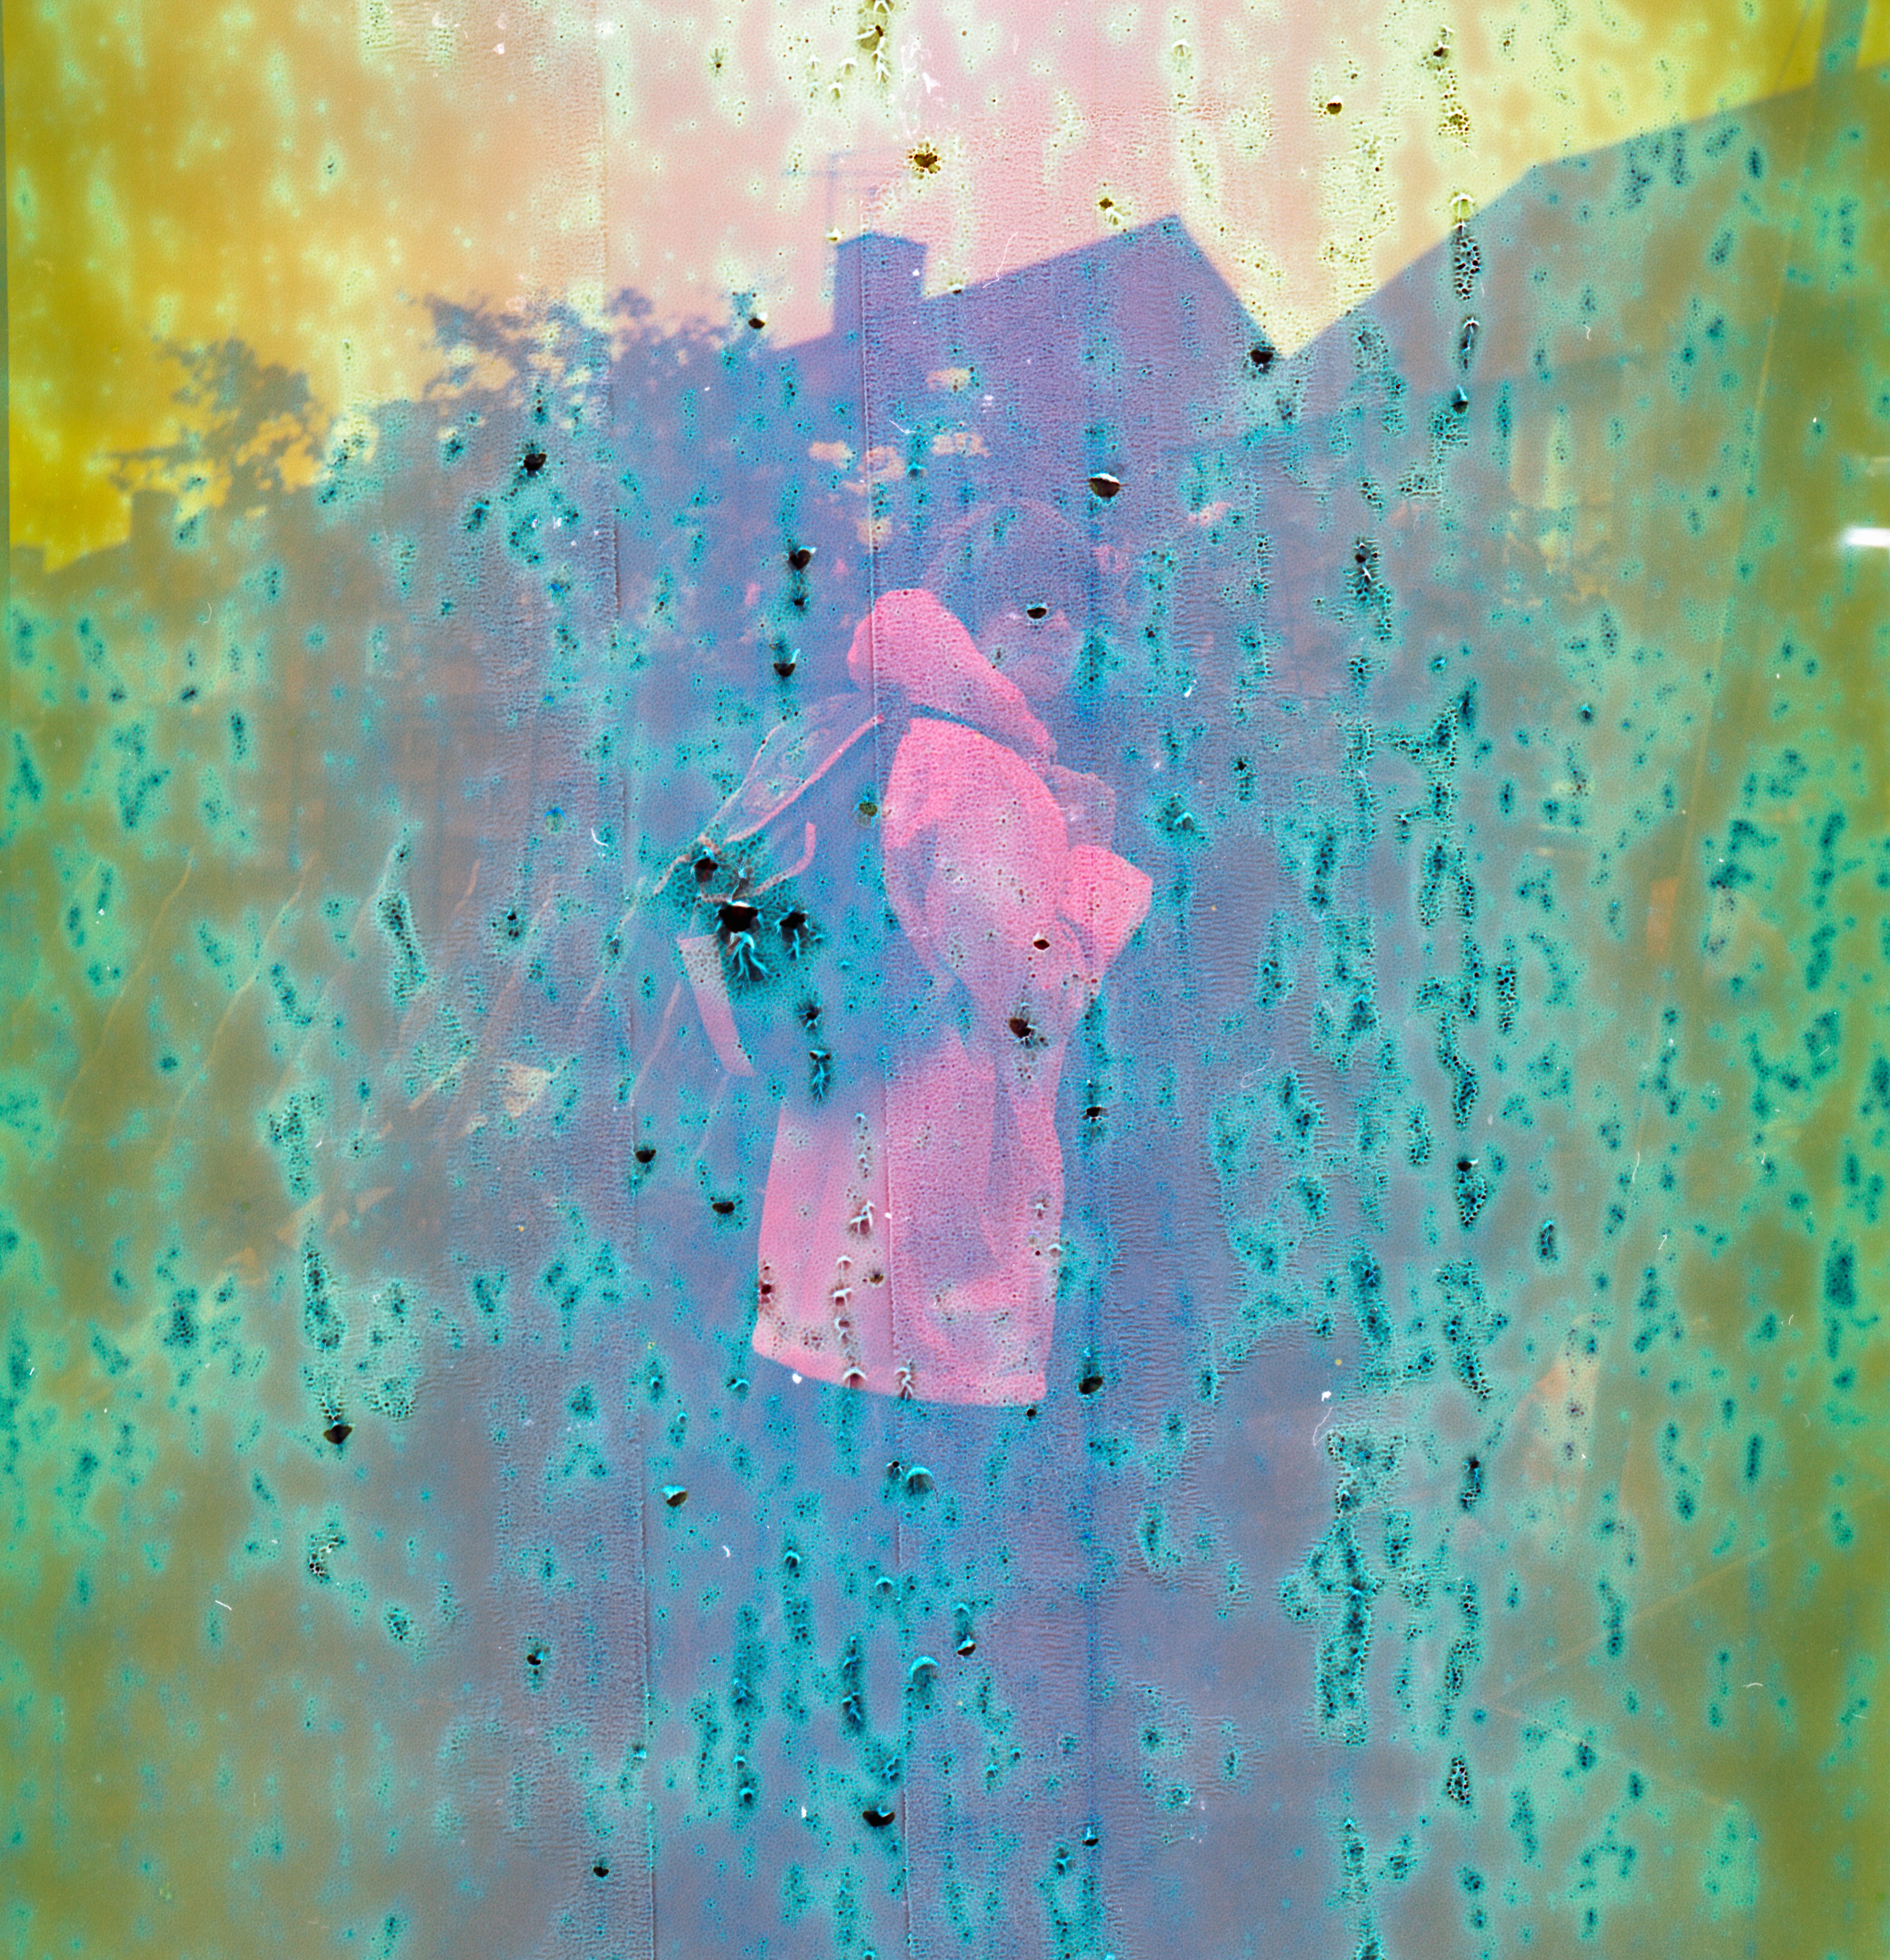 I bought a roll of unexposed film that expired in 1974 on eBay, but when it came it turned out the roll was already exposed!
So I sent it off to the lovely folks at Harman Lab who took on the challenge of developing this 45 year old roll of film.
Here are the scans, completely unaltered in all their psychedelic glory. 